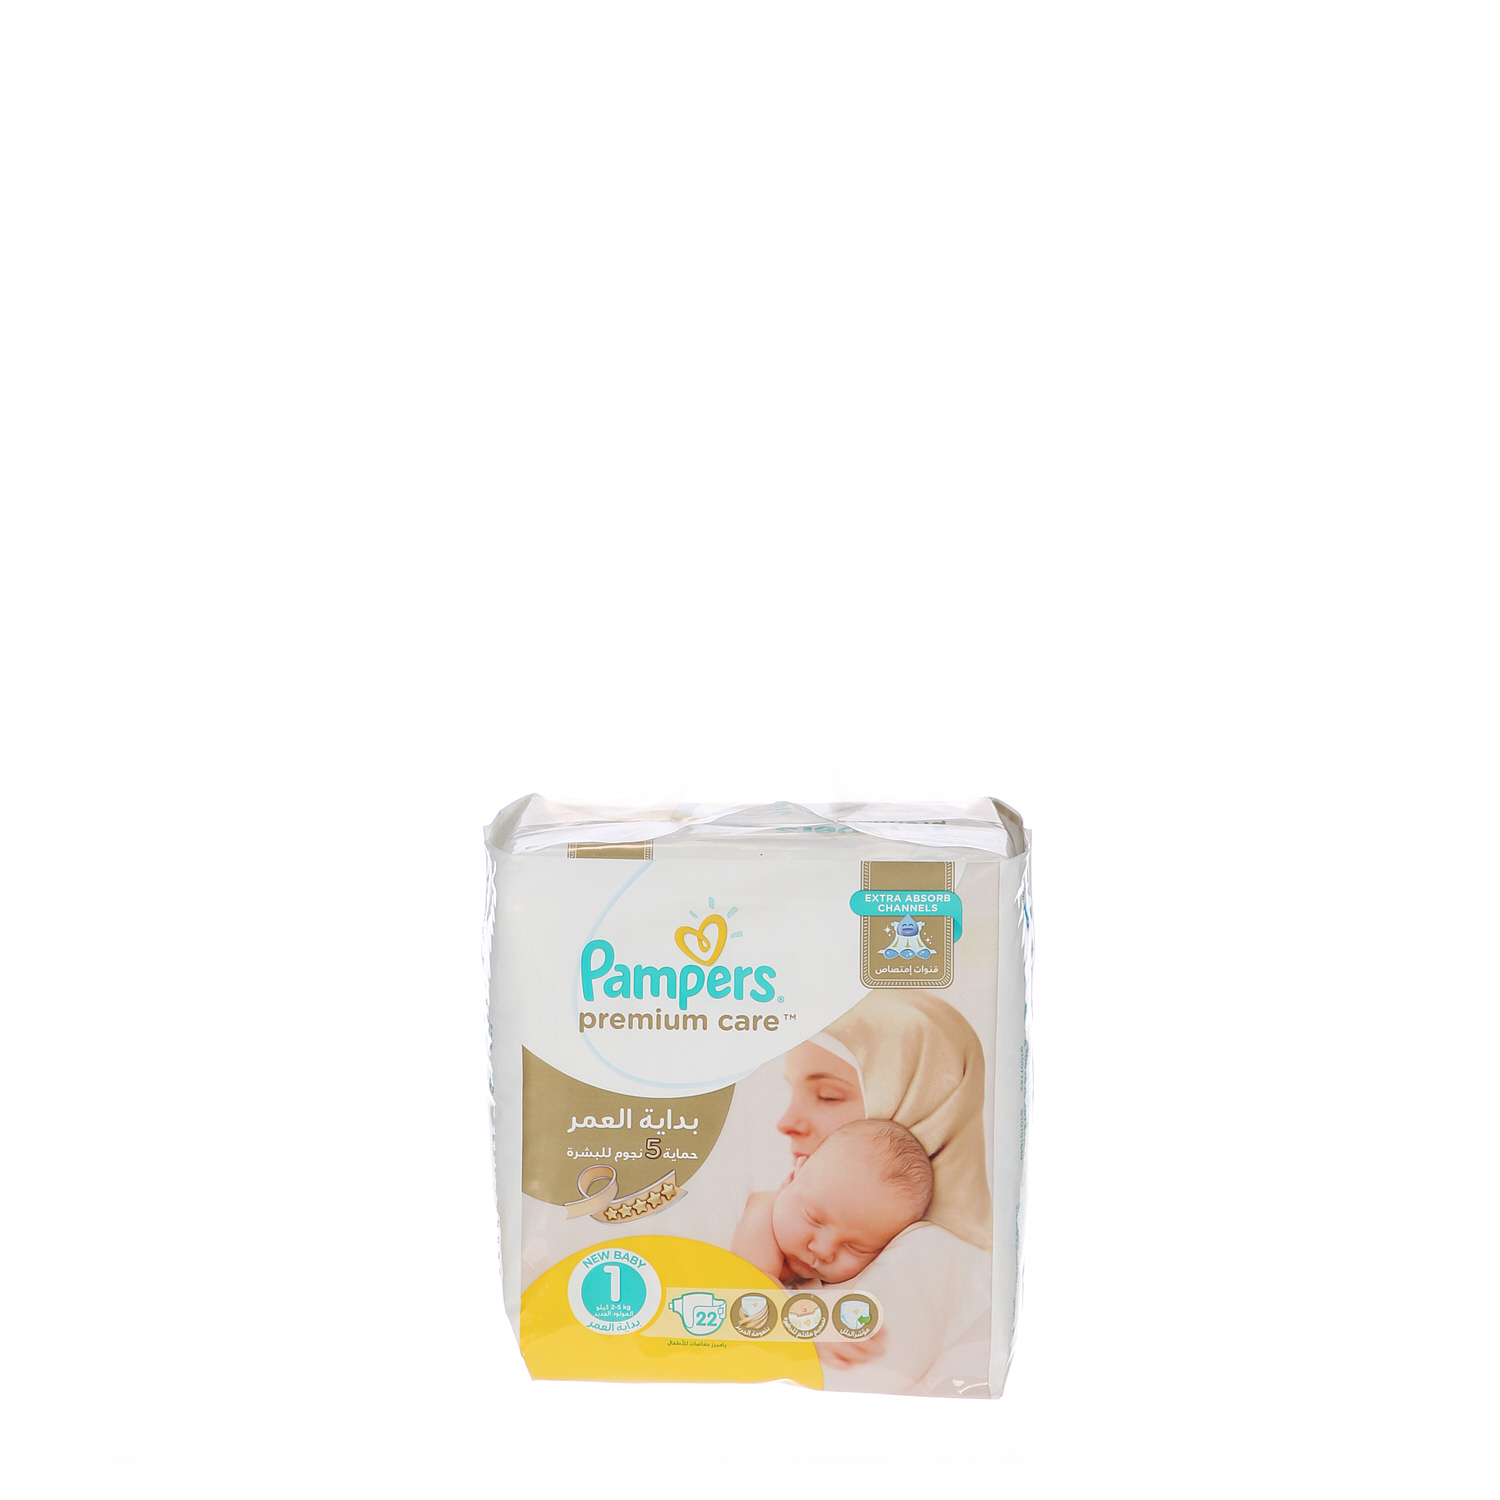 Pampers Premium Care Size 1 22 Pieces